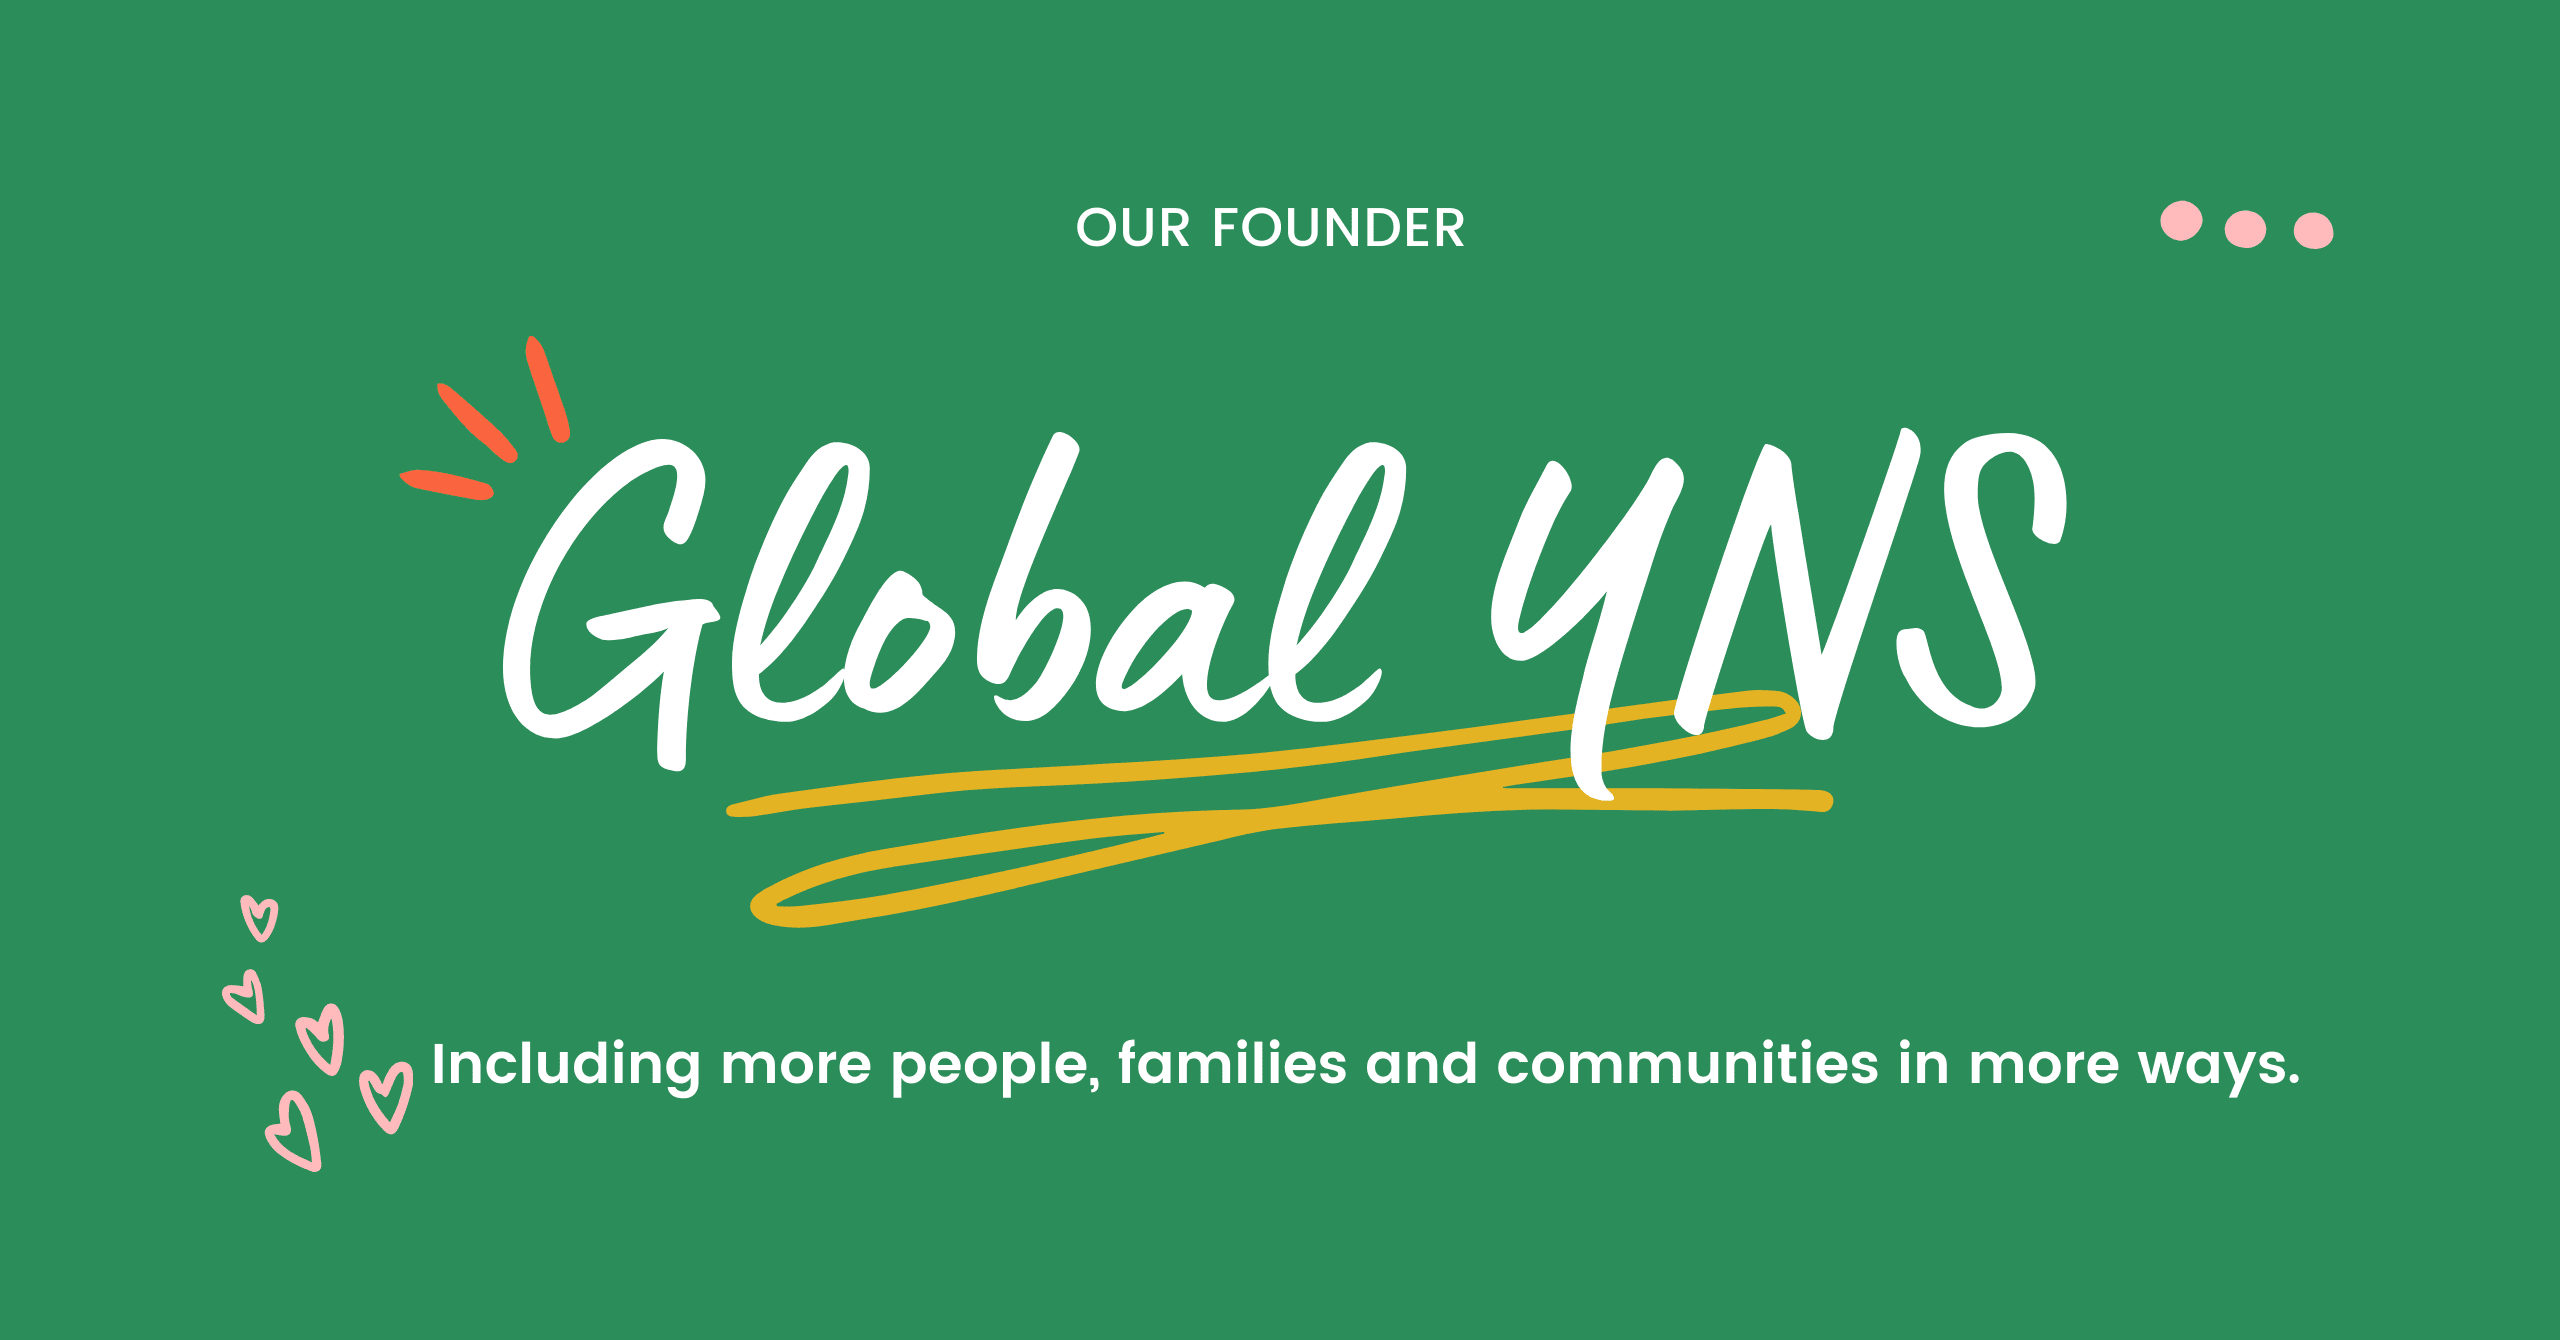 Global YNS’ mission fuels my work: an interview with our founder